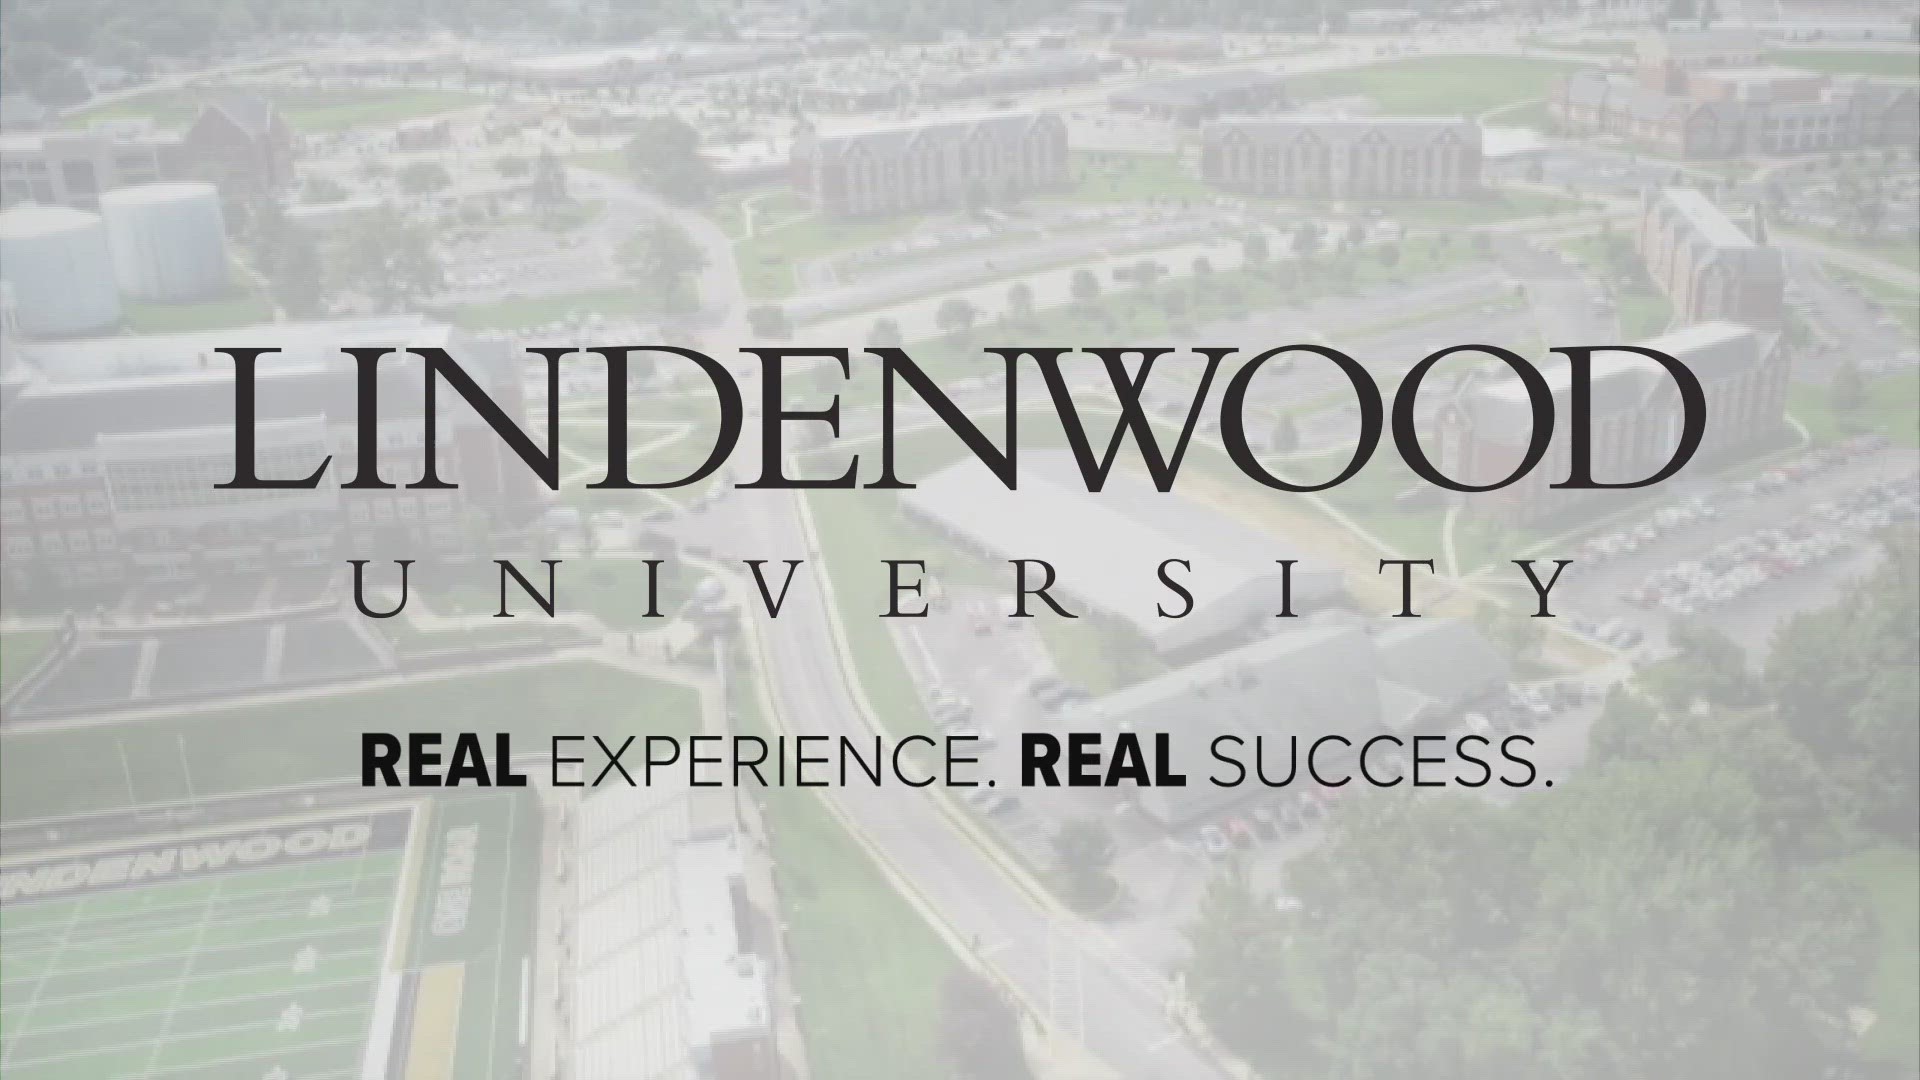 Lindenwood University’s new internal IT Services business employs current students and promotes career readiness.